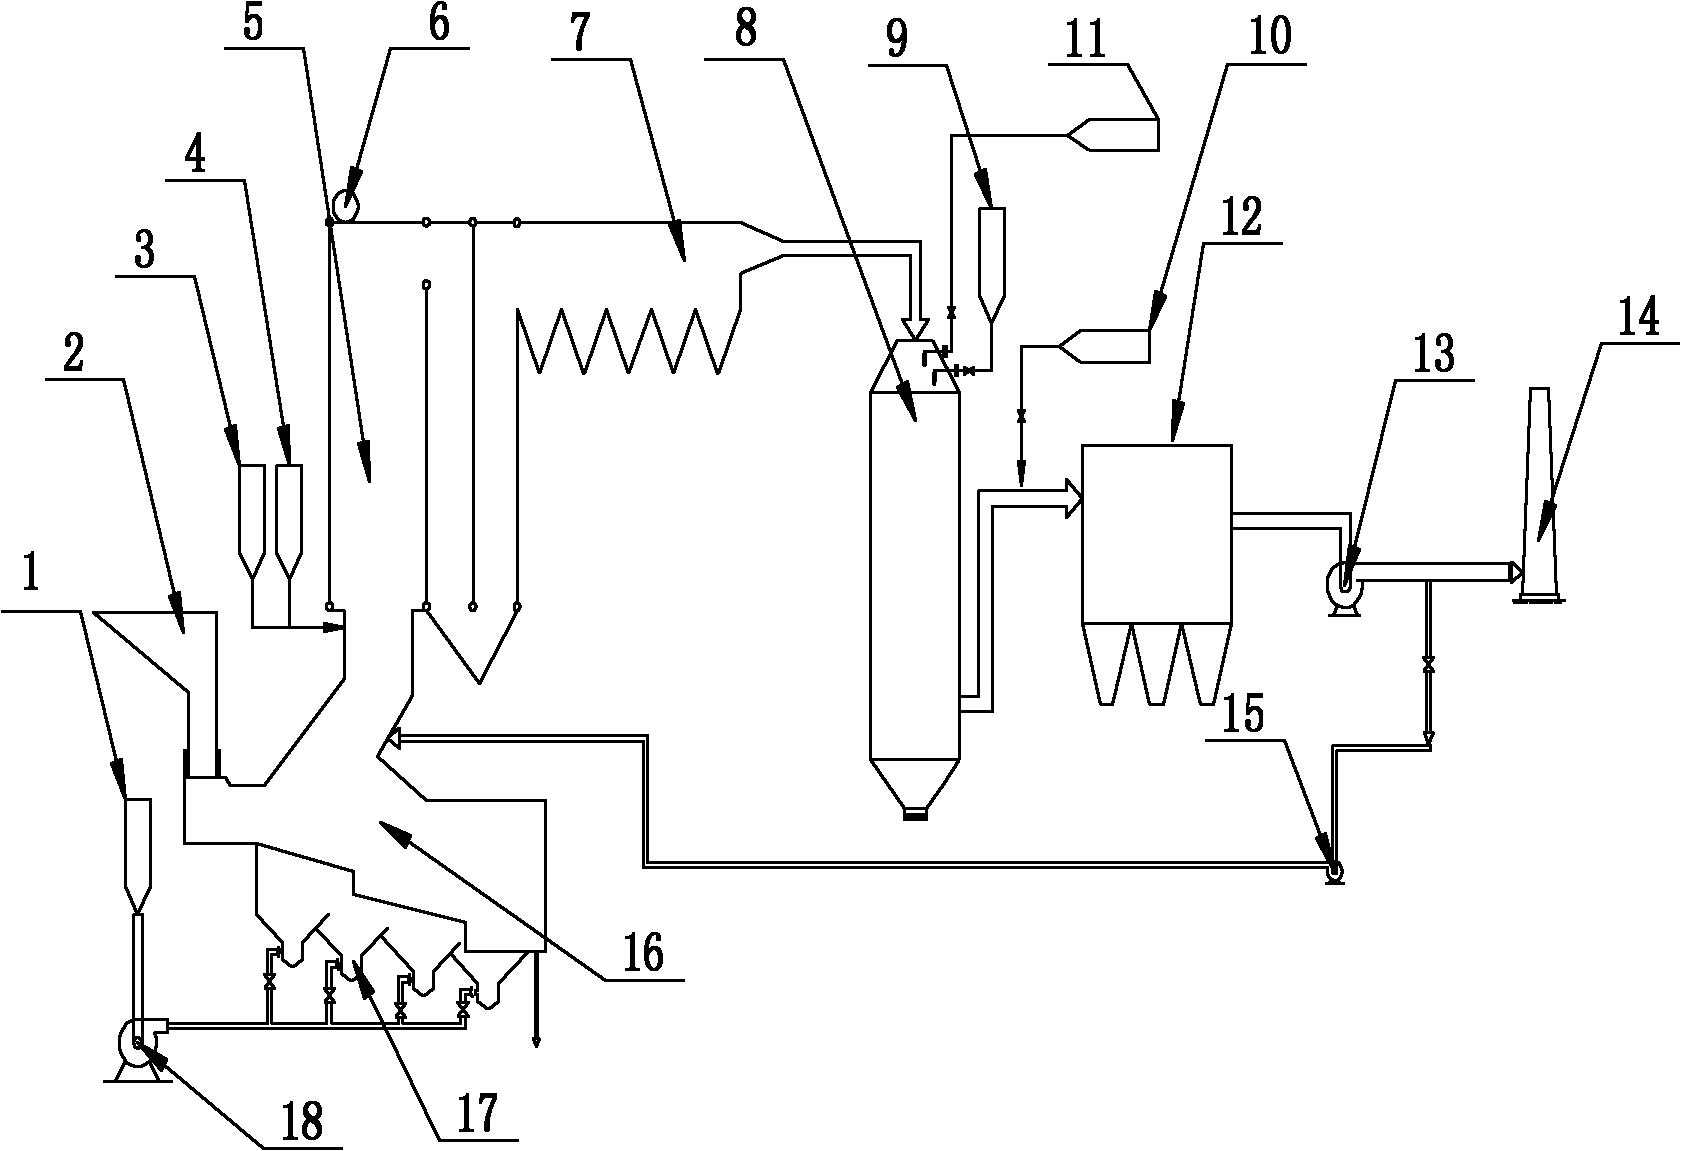 Method and device for reducing emission limits of nitrogen oxides in waste incineration flue gas